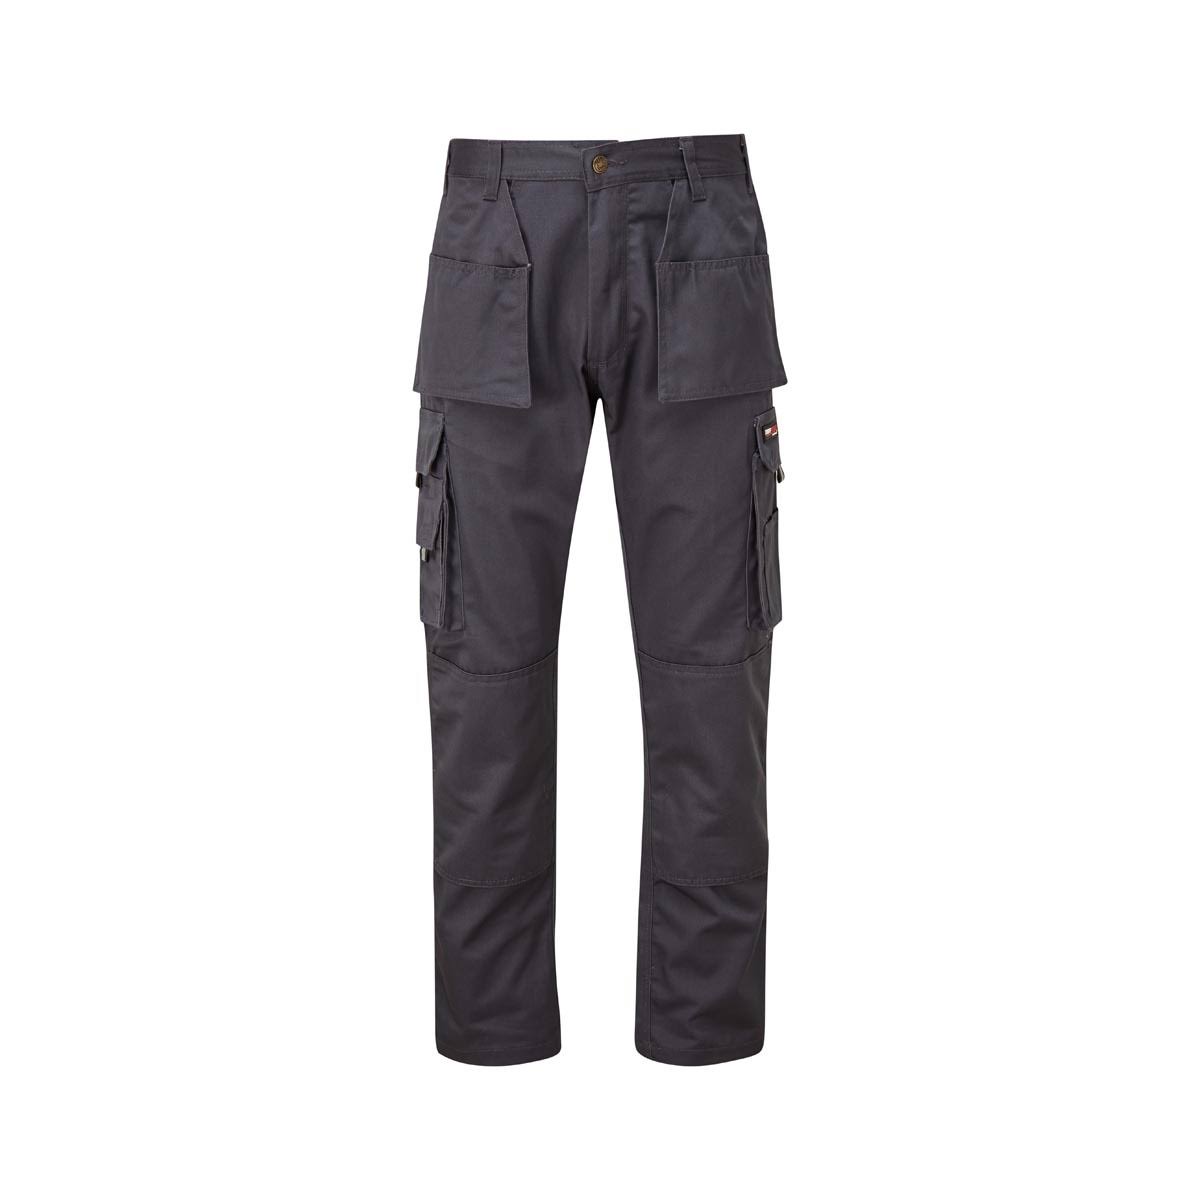 Tuffstuff 711-GRY-32R 711 Pro Work Trousers Grey - 32R | By Toolden